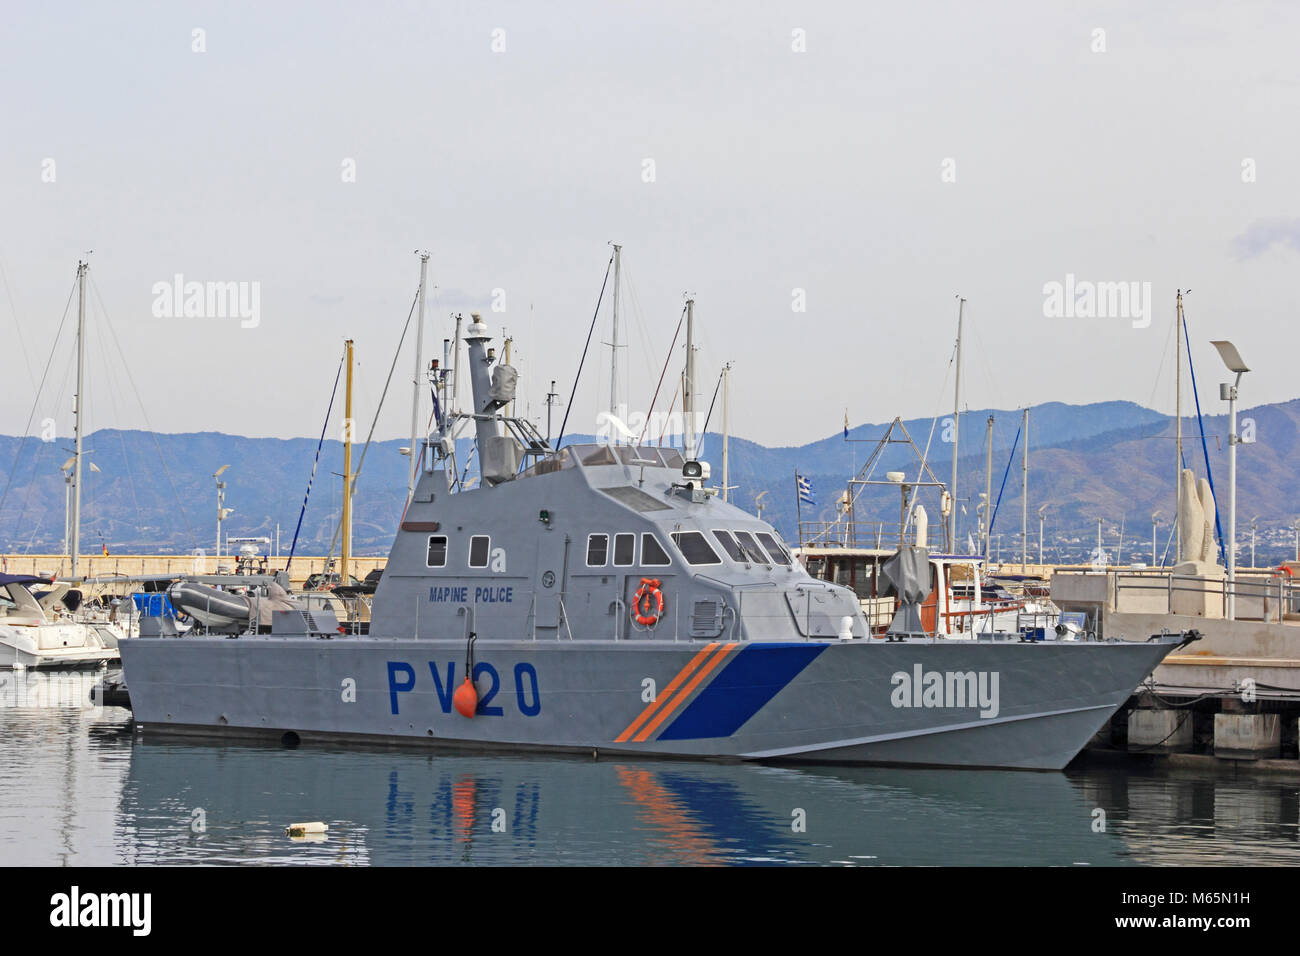 Cypriot Marine Police boat, PV20, moored in harbour, Polis, Cyprus Stock Photo